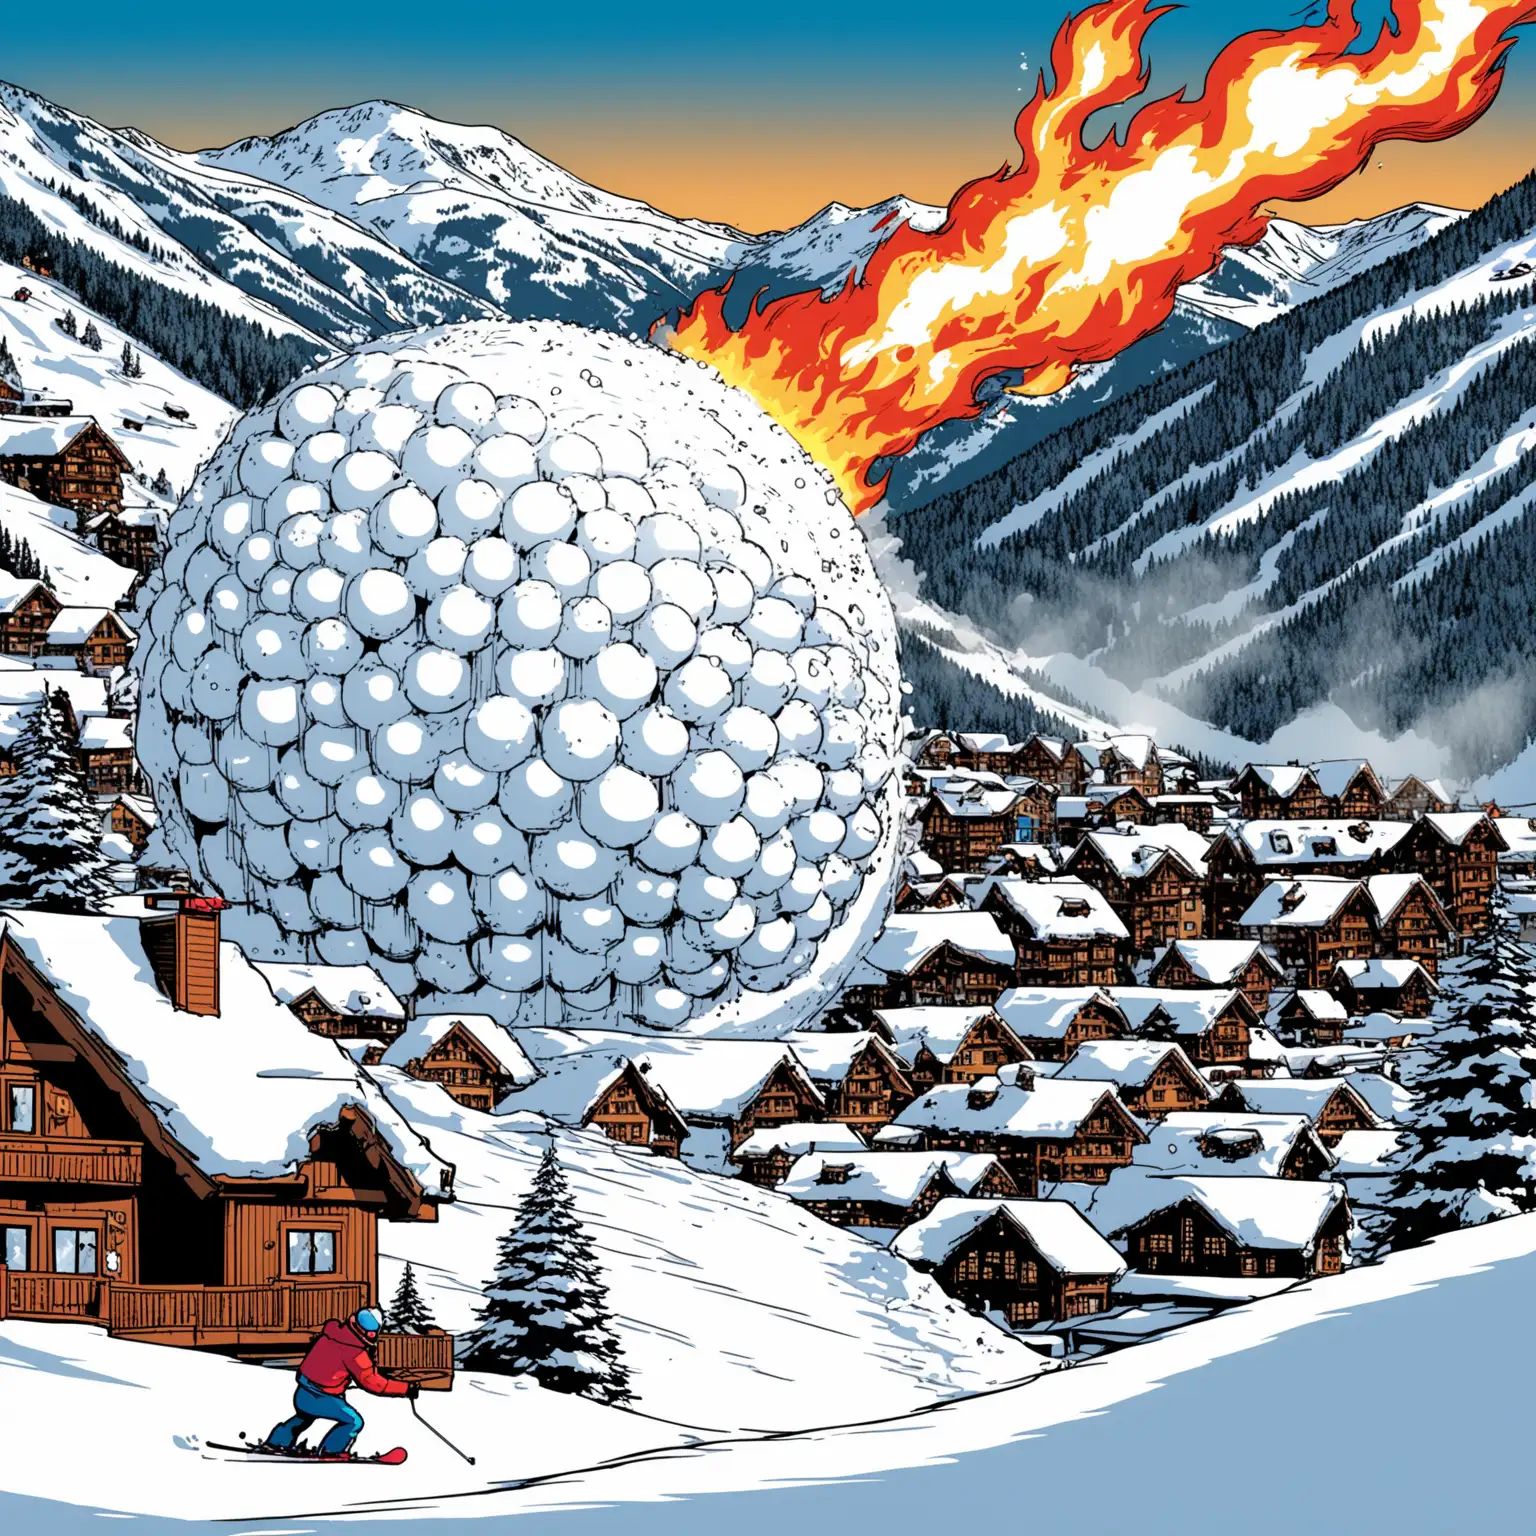 Create a Comic book image of a huge snow ball in motion rolling down a snowy mountain with a ski village and small fire balls being shot at it 